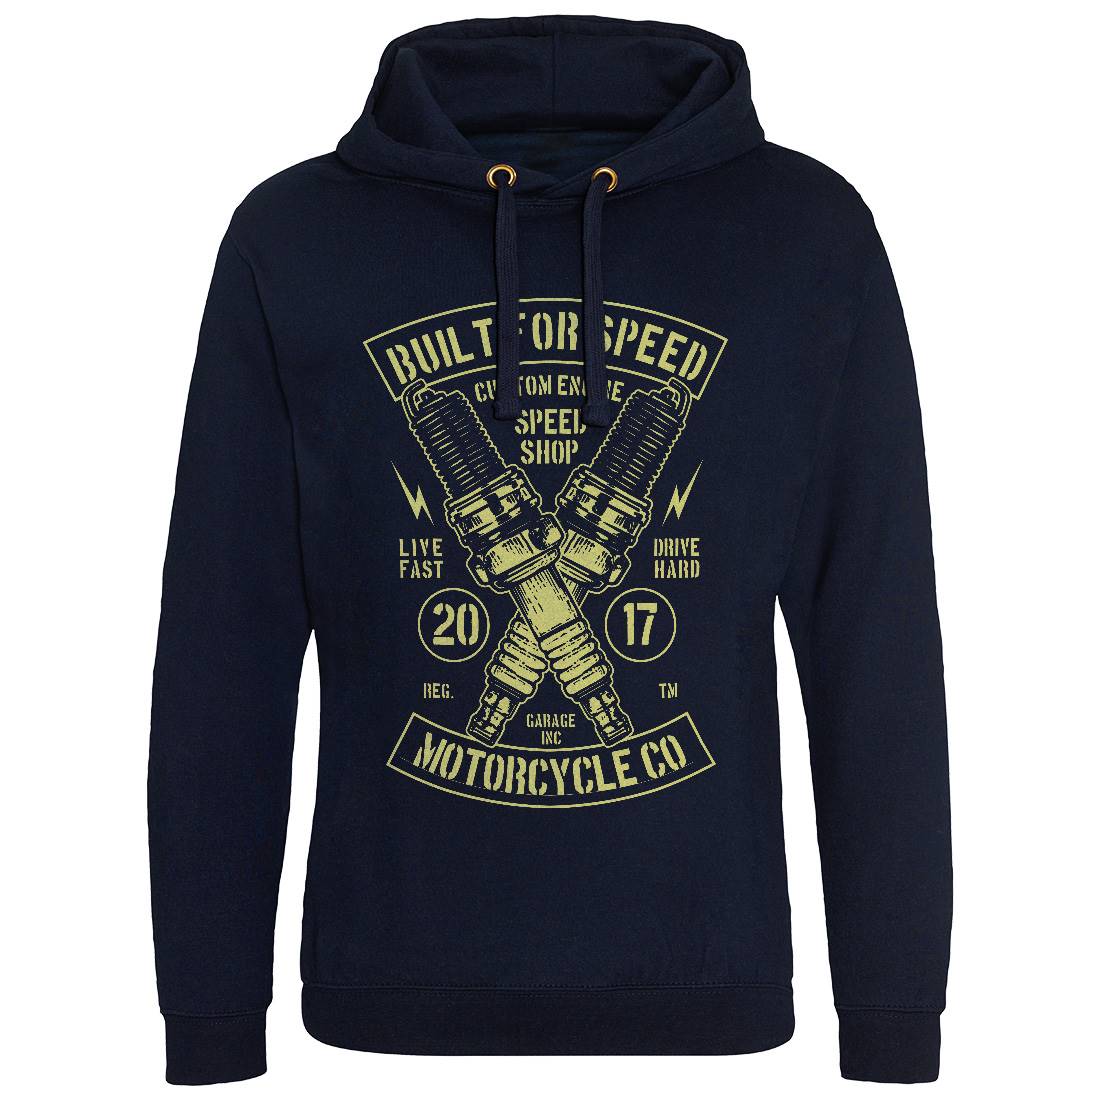 Built For Speed Mens Hoodie Without Pocket Motorcycles B188